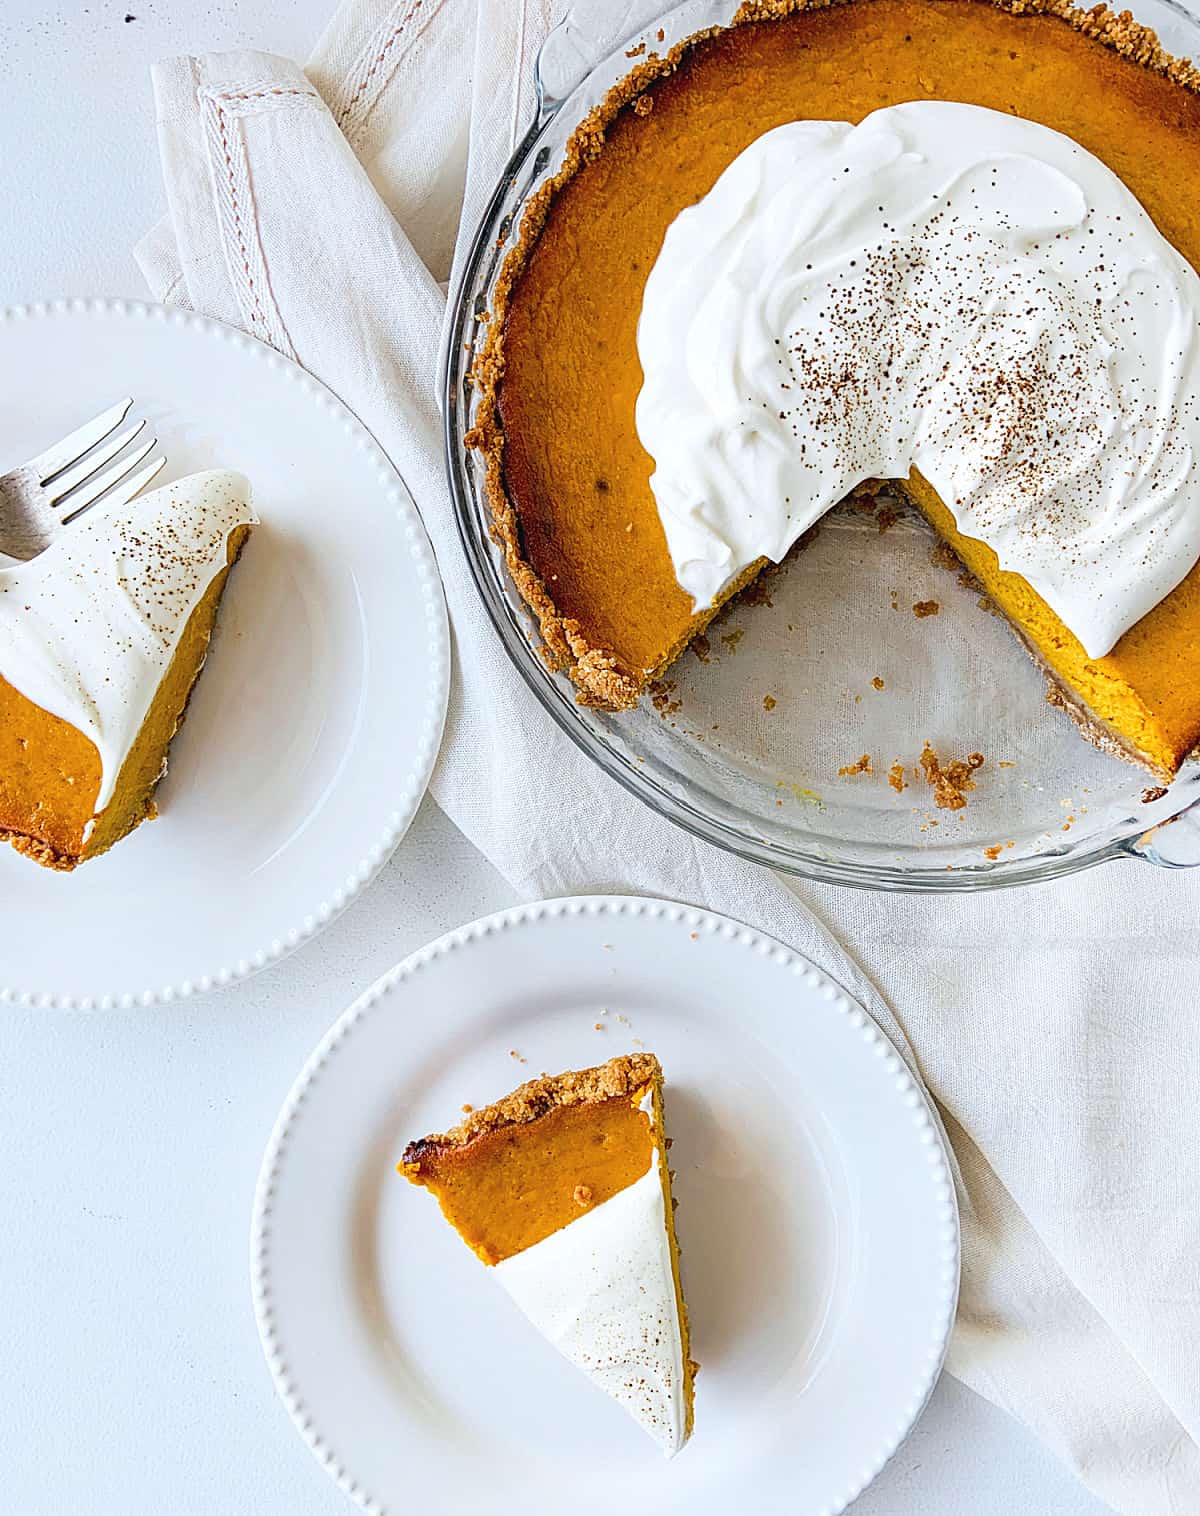 White plates with pumpkin pie slices, rest of pie in glass dish on white cloth and table